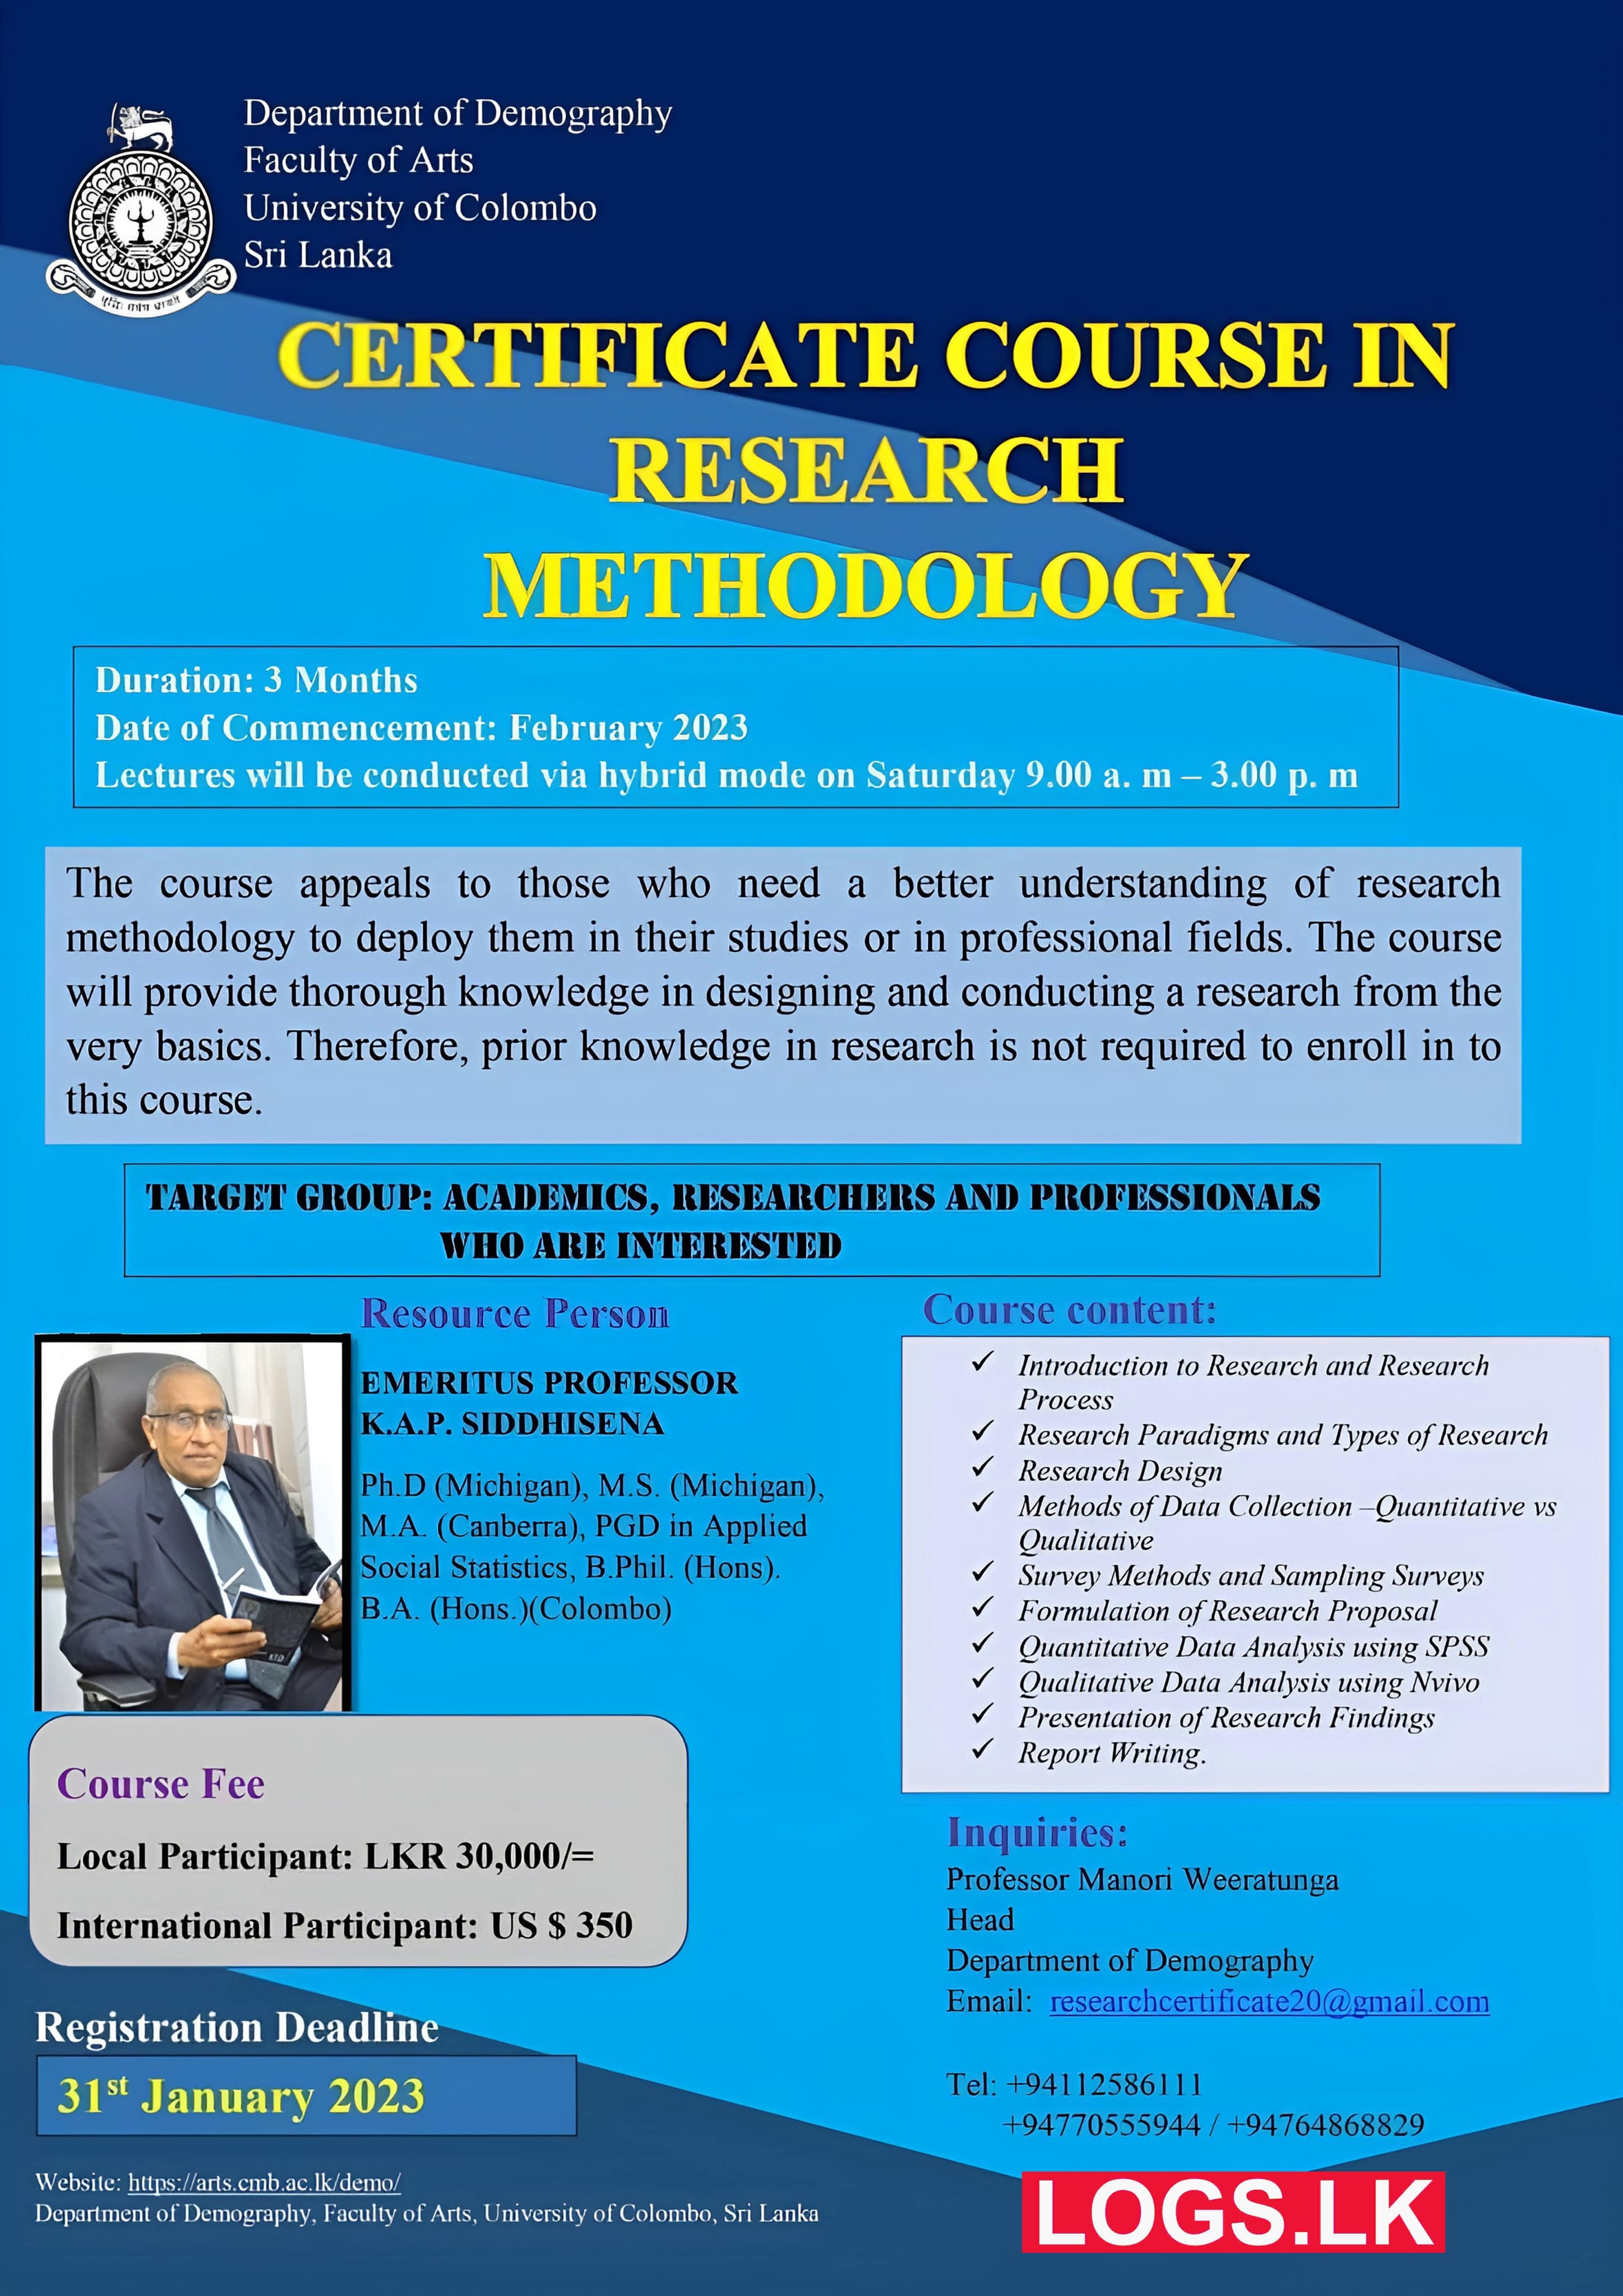 Certificate Course in Research Methodology 2023 - University of Colombo Courses 2023 Application Form, Details Download